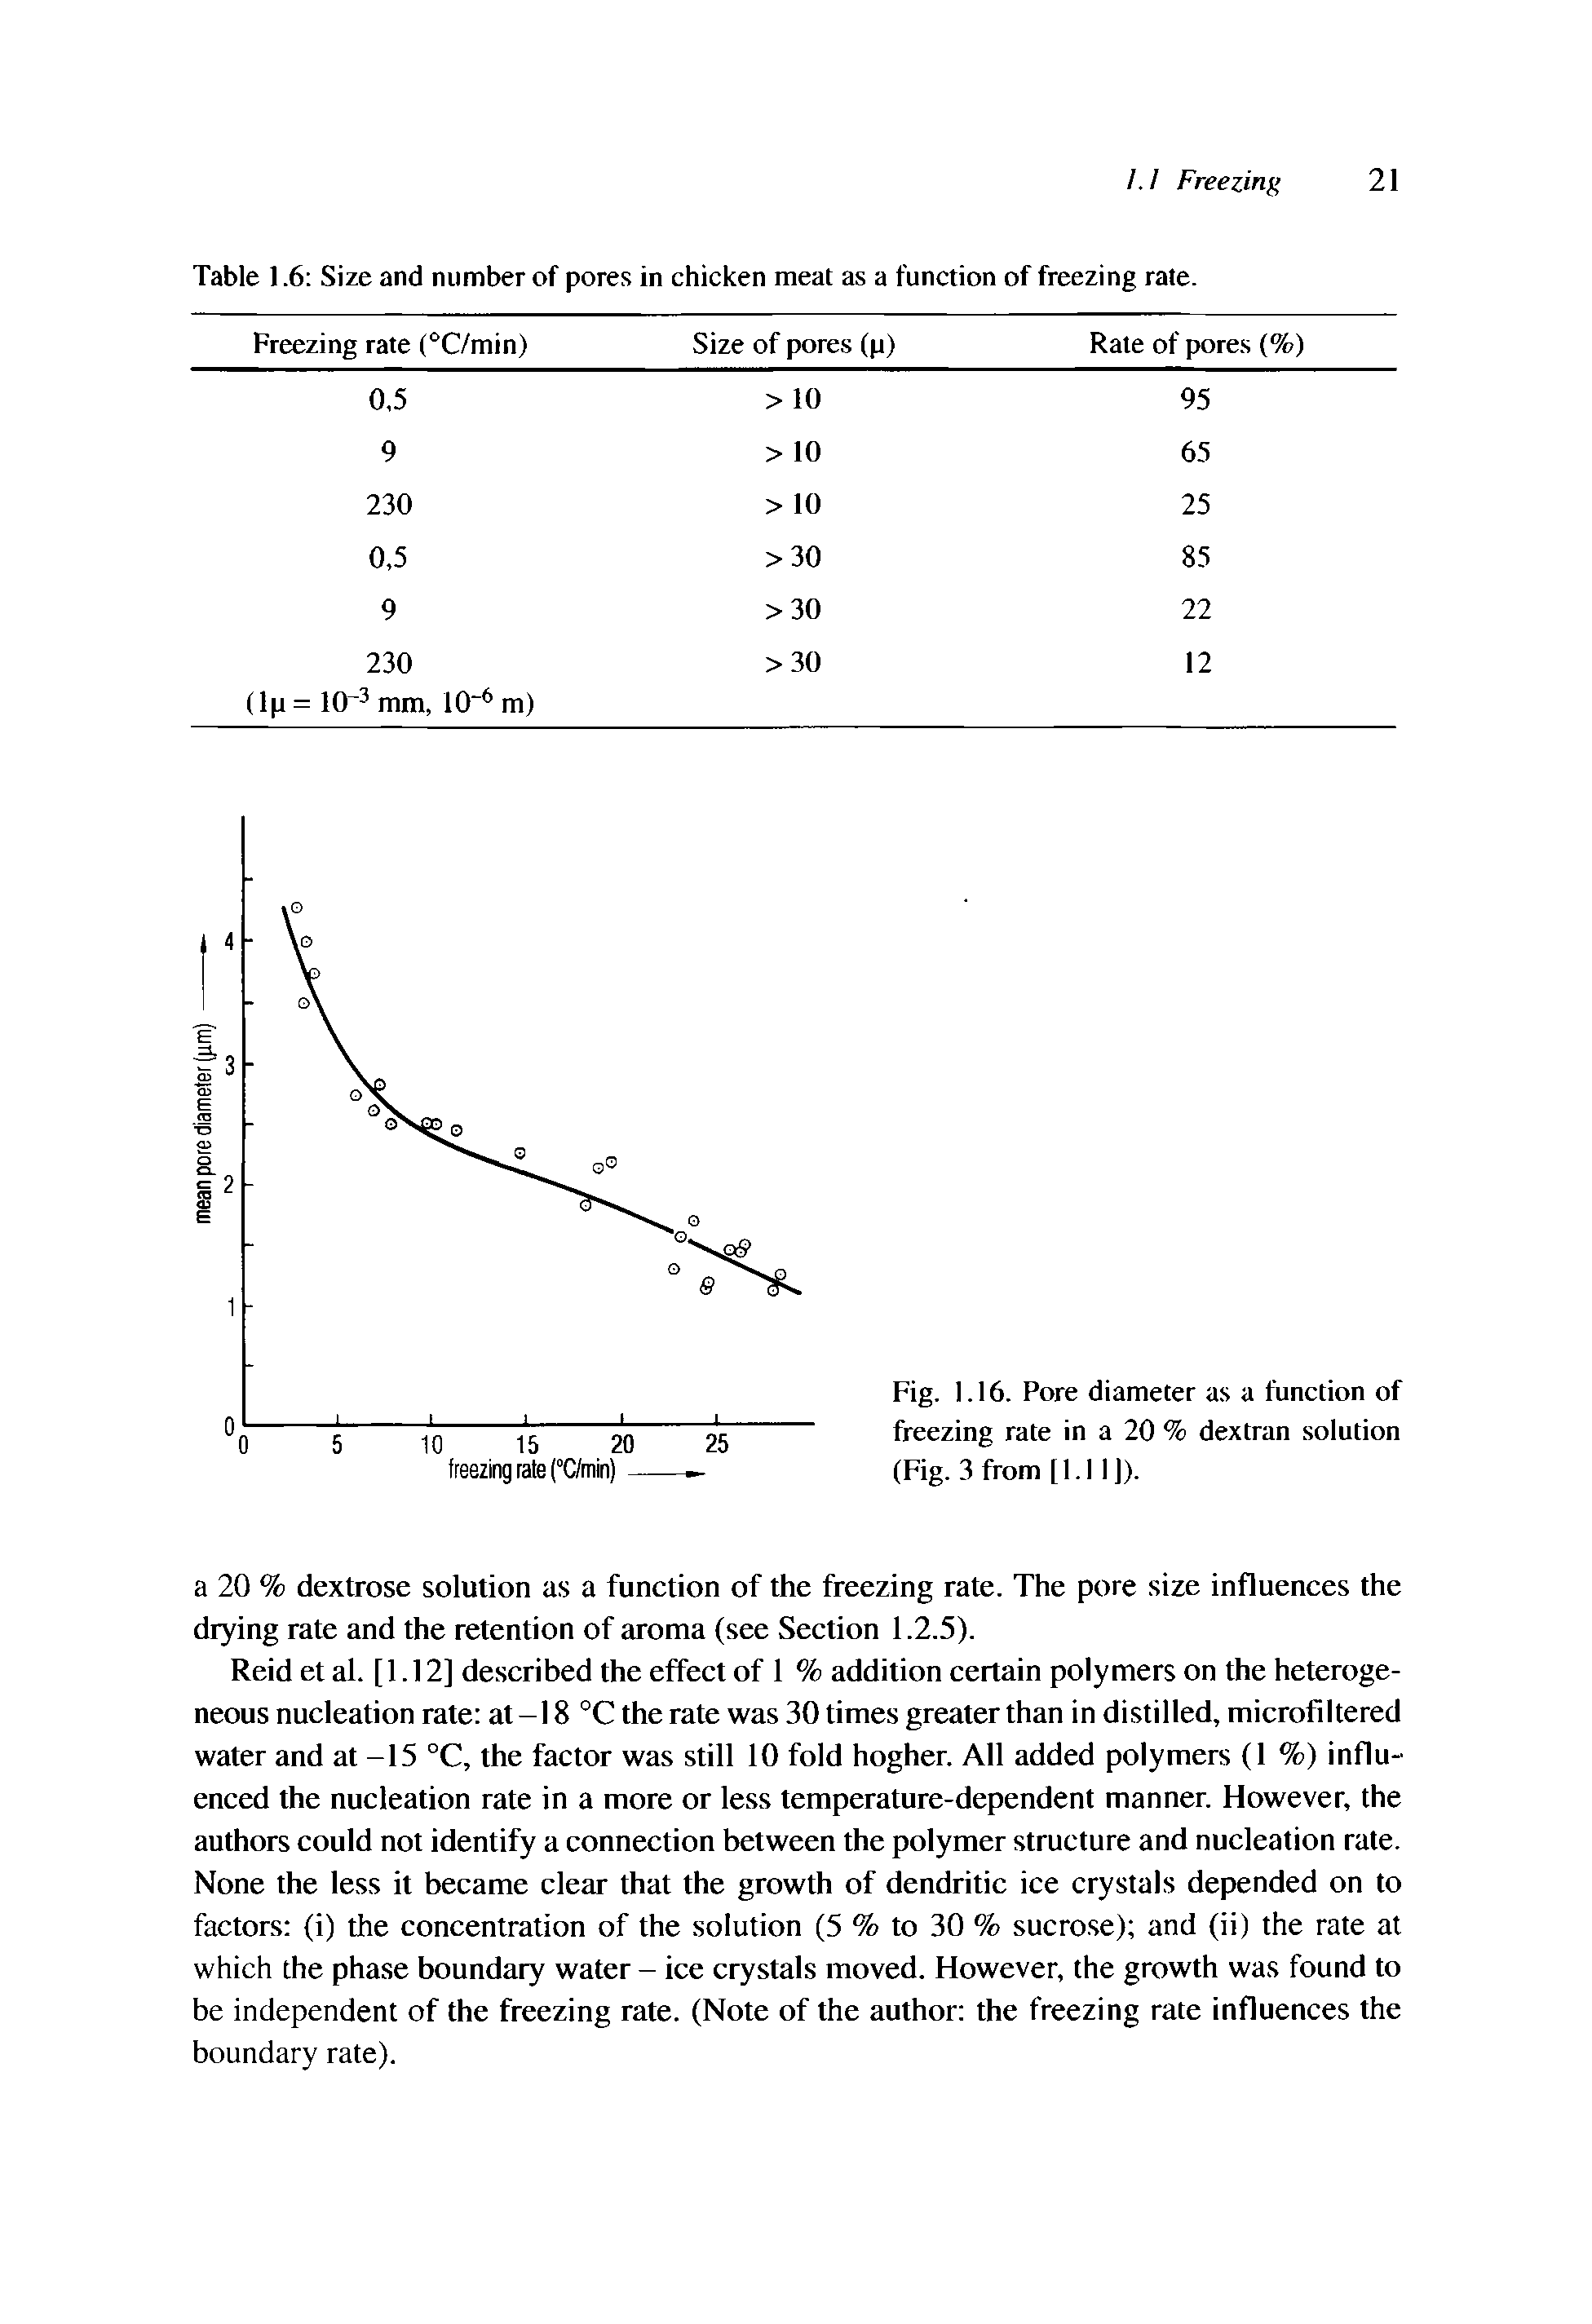 Table 1.6 Size and number of pores in chicken meat as a function of freezing rate.